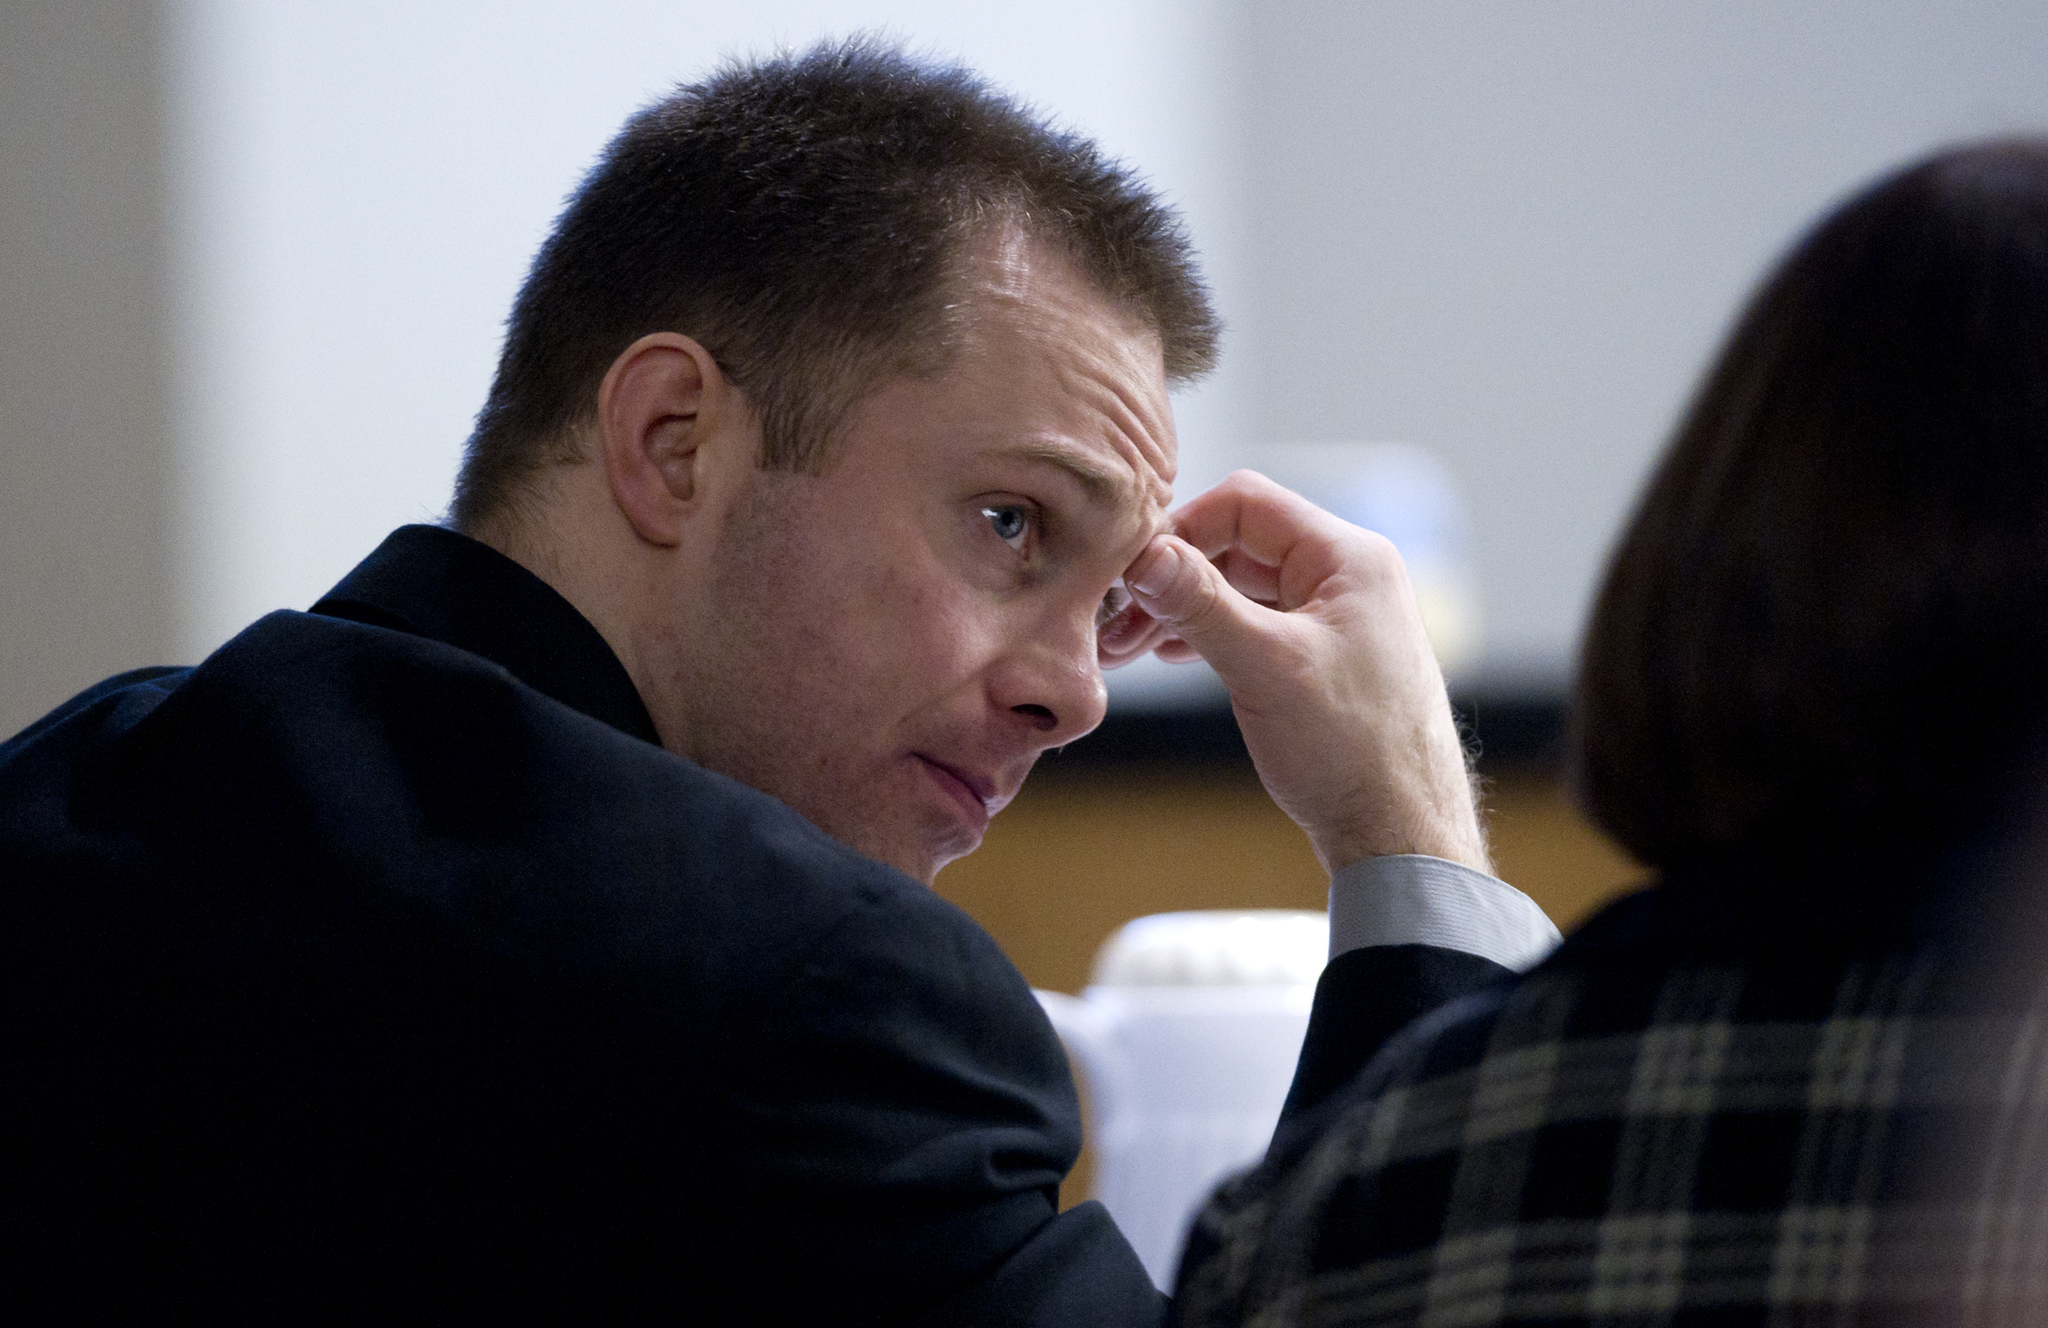 Christopher D. Strawn appears in Juneau Superior Court on Thursday, Feb. 9, 2017, during his trial on charges in the murder of 30-year-old Brandon C. Cook at the Kodzoff Acres Mobile Home Park Oct. 20, 2015.